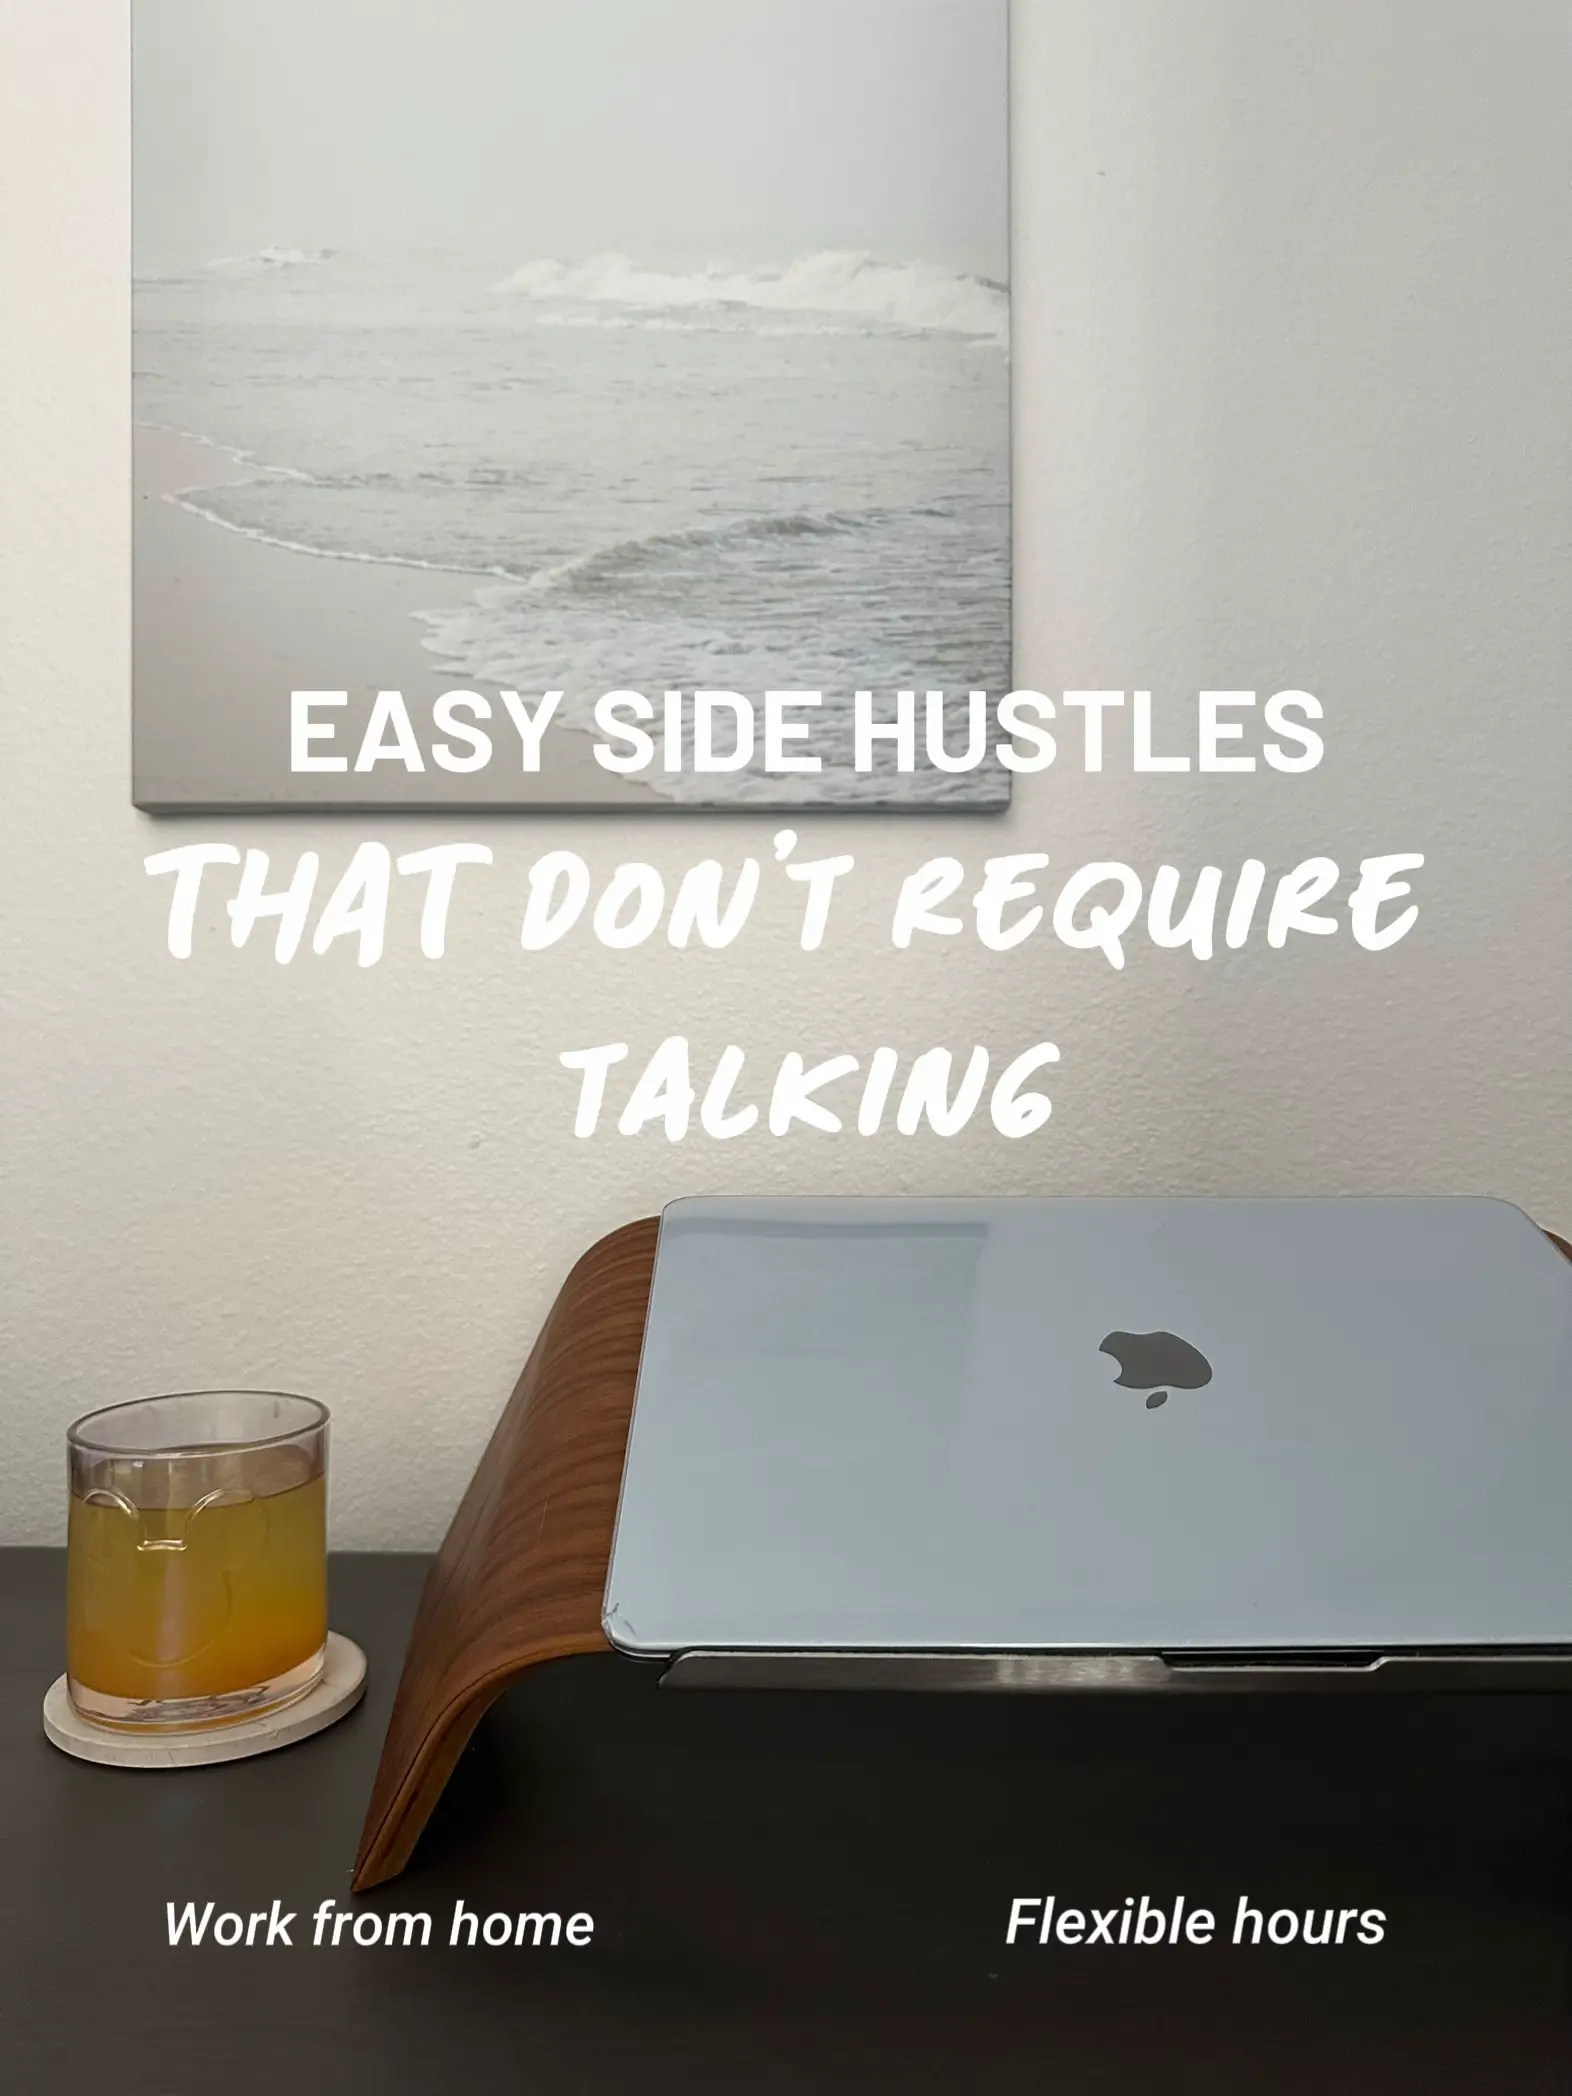  An easy side hustle that doesn't require flexible hours is working from home.